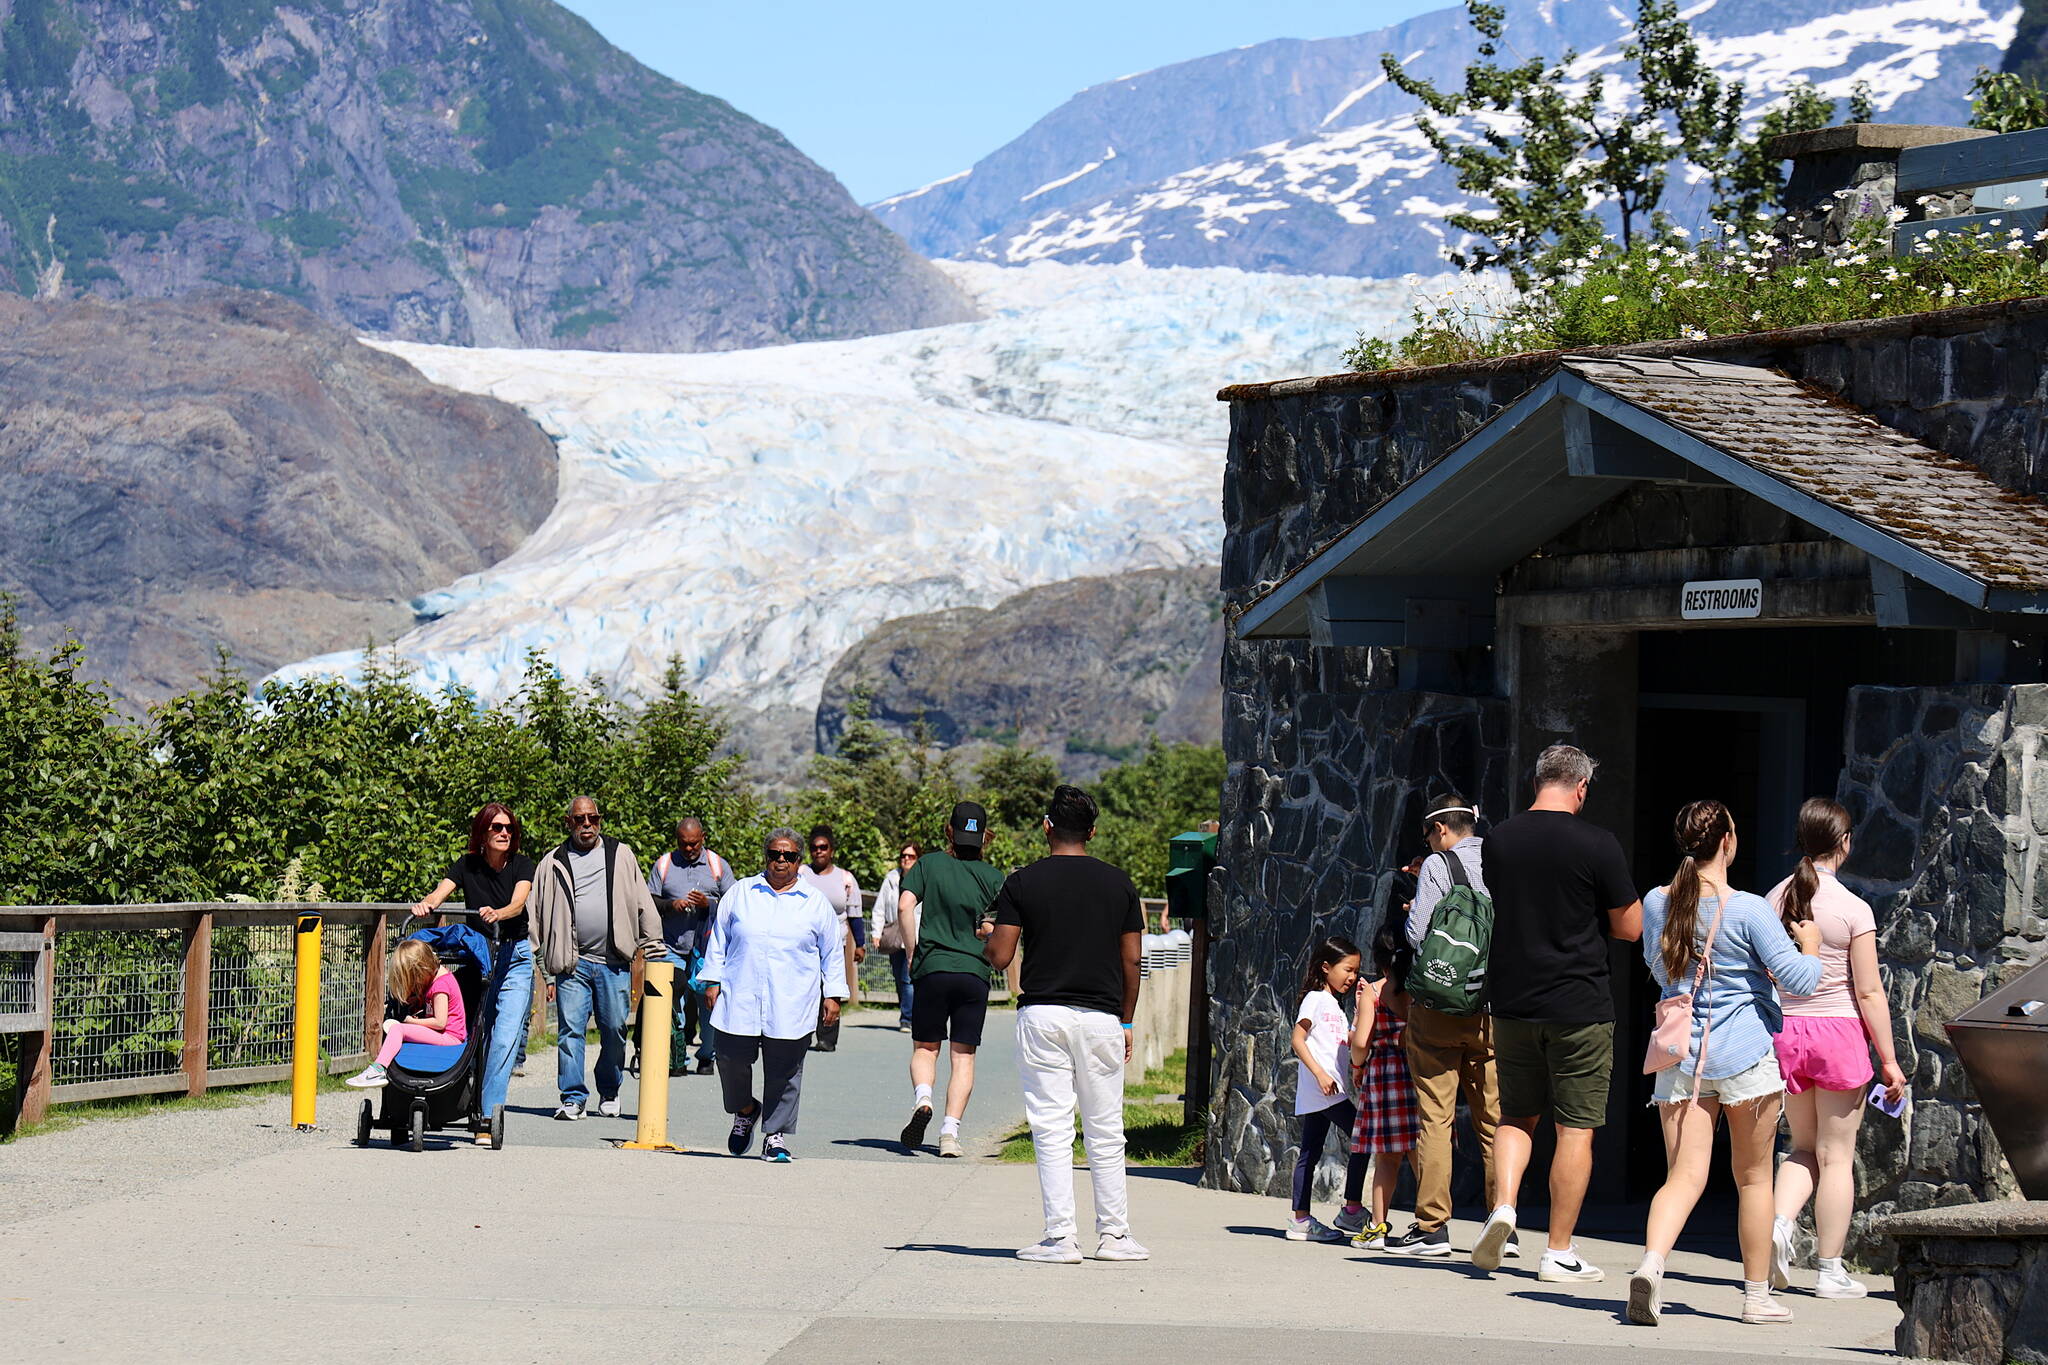 A crowd of visitors tours the Mendenhall Glacier on Friday. Officials announced Friday limits on commercial tours are being imposed as capacity limits are being rapidly reached, which will impact the second half of the summer tourism season. A plan by the U.S. Forest Service to overhaul the facilities of the Mendenhall Glacier Recreation Area is now in the final stage, which would replace the existing capacity limits with newly defined management practices. (Clarise Larson / Juneau Empire)